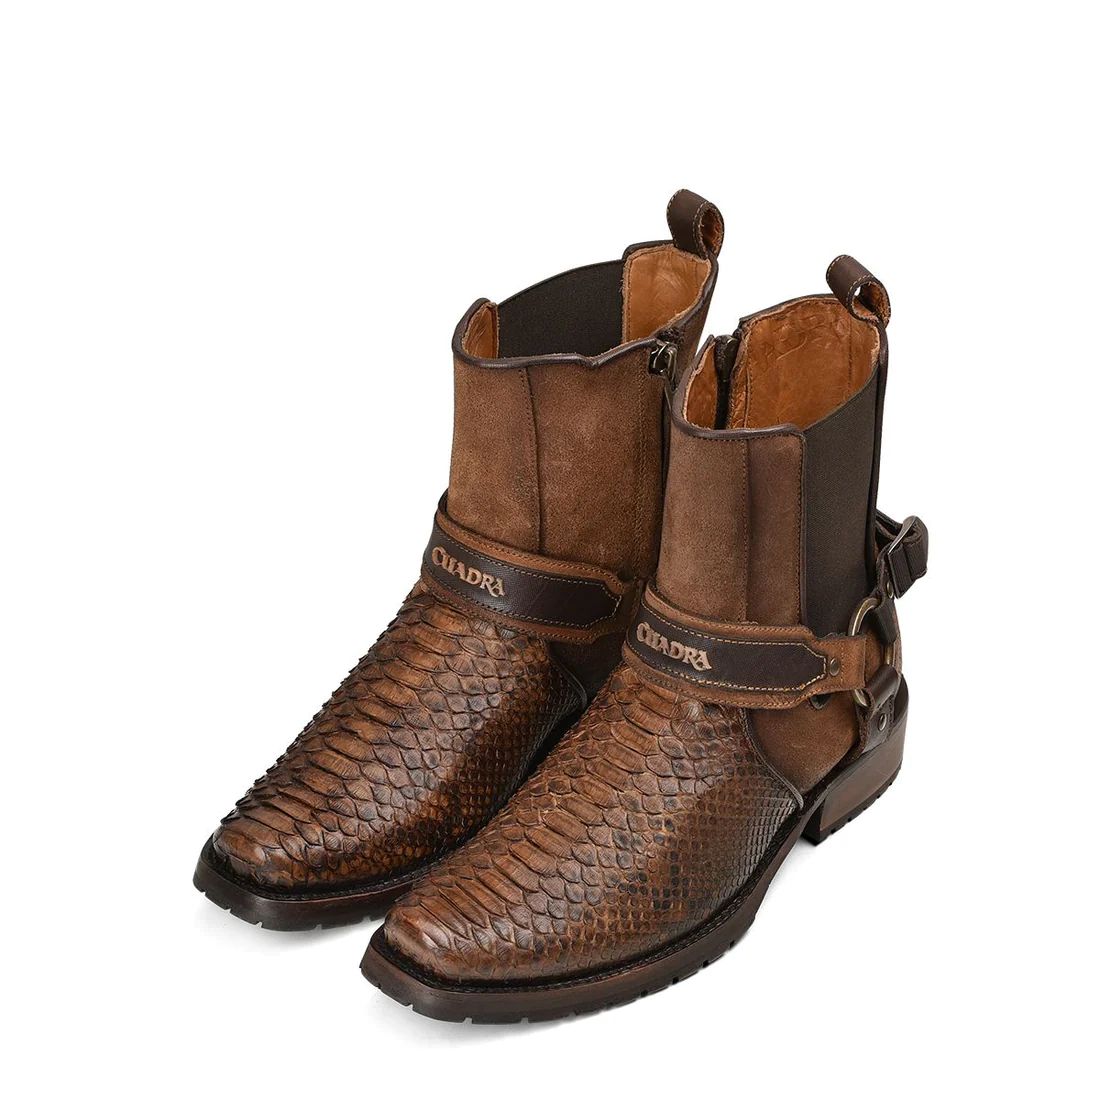 Cuadra | Urban Hand-Painted Brown Python Leather Boot - Click Image to Close